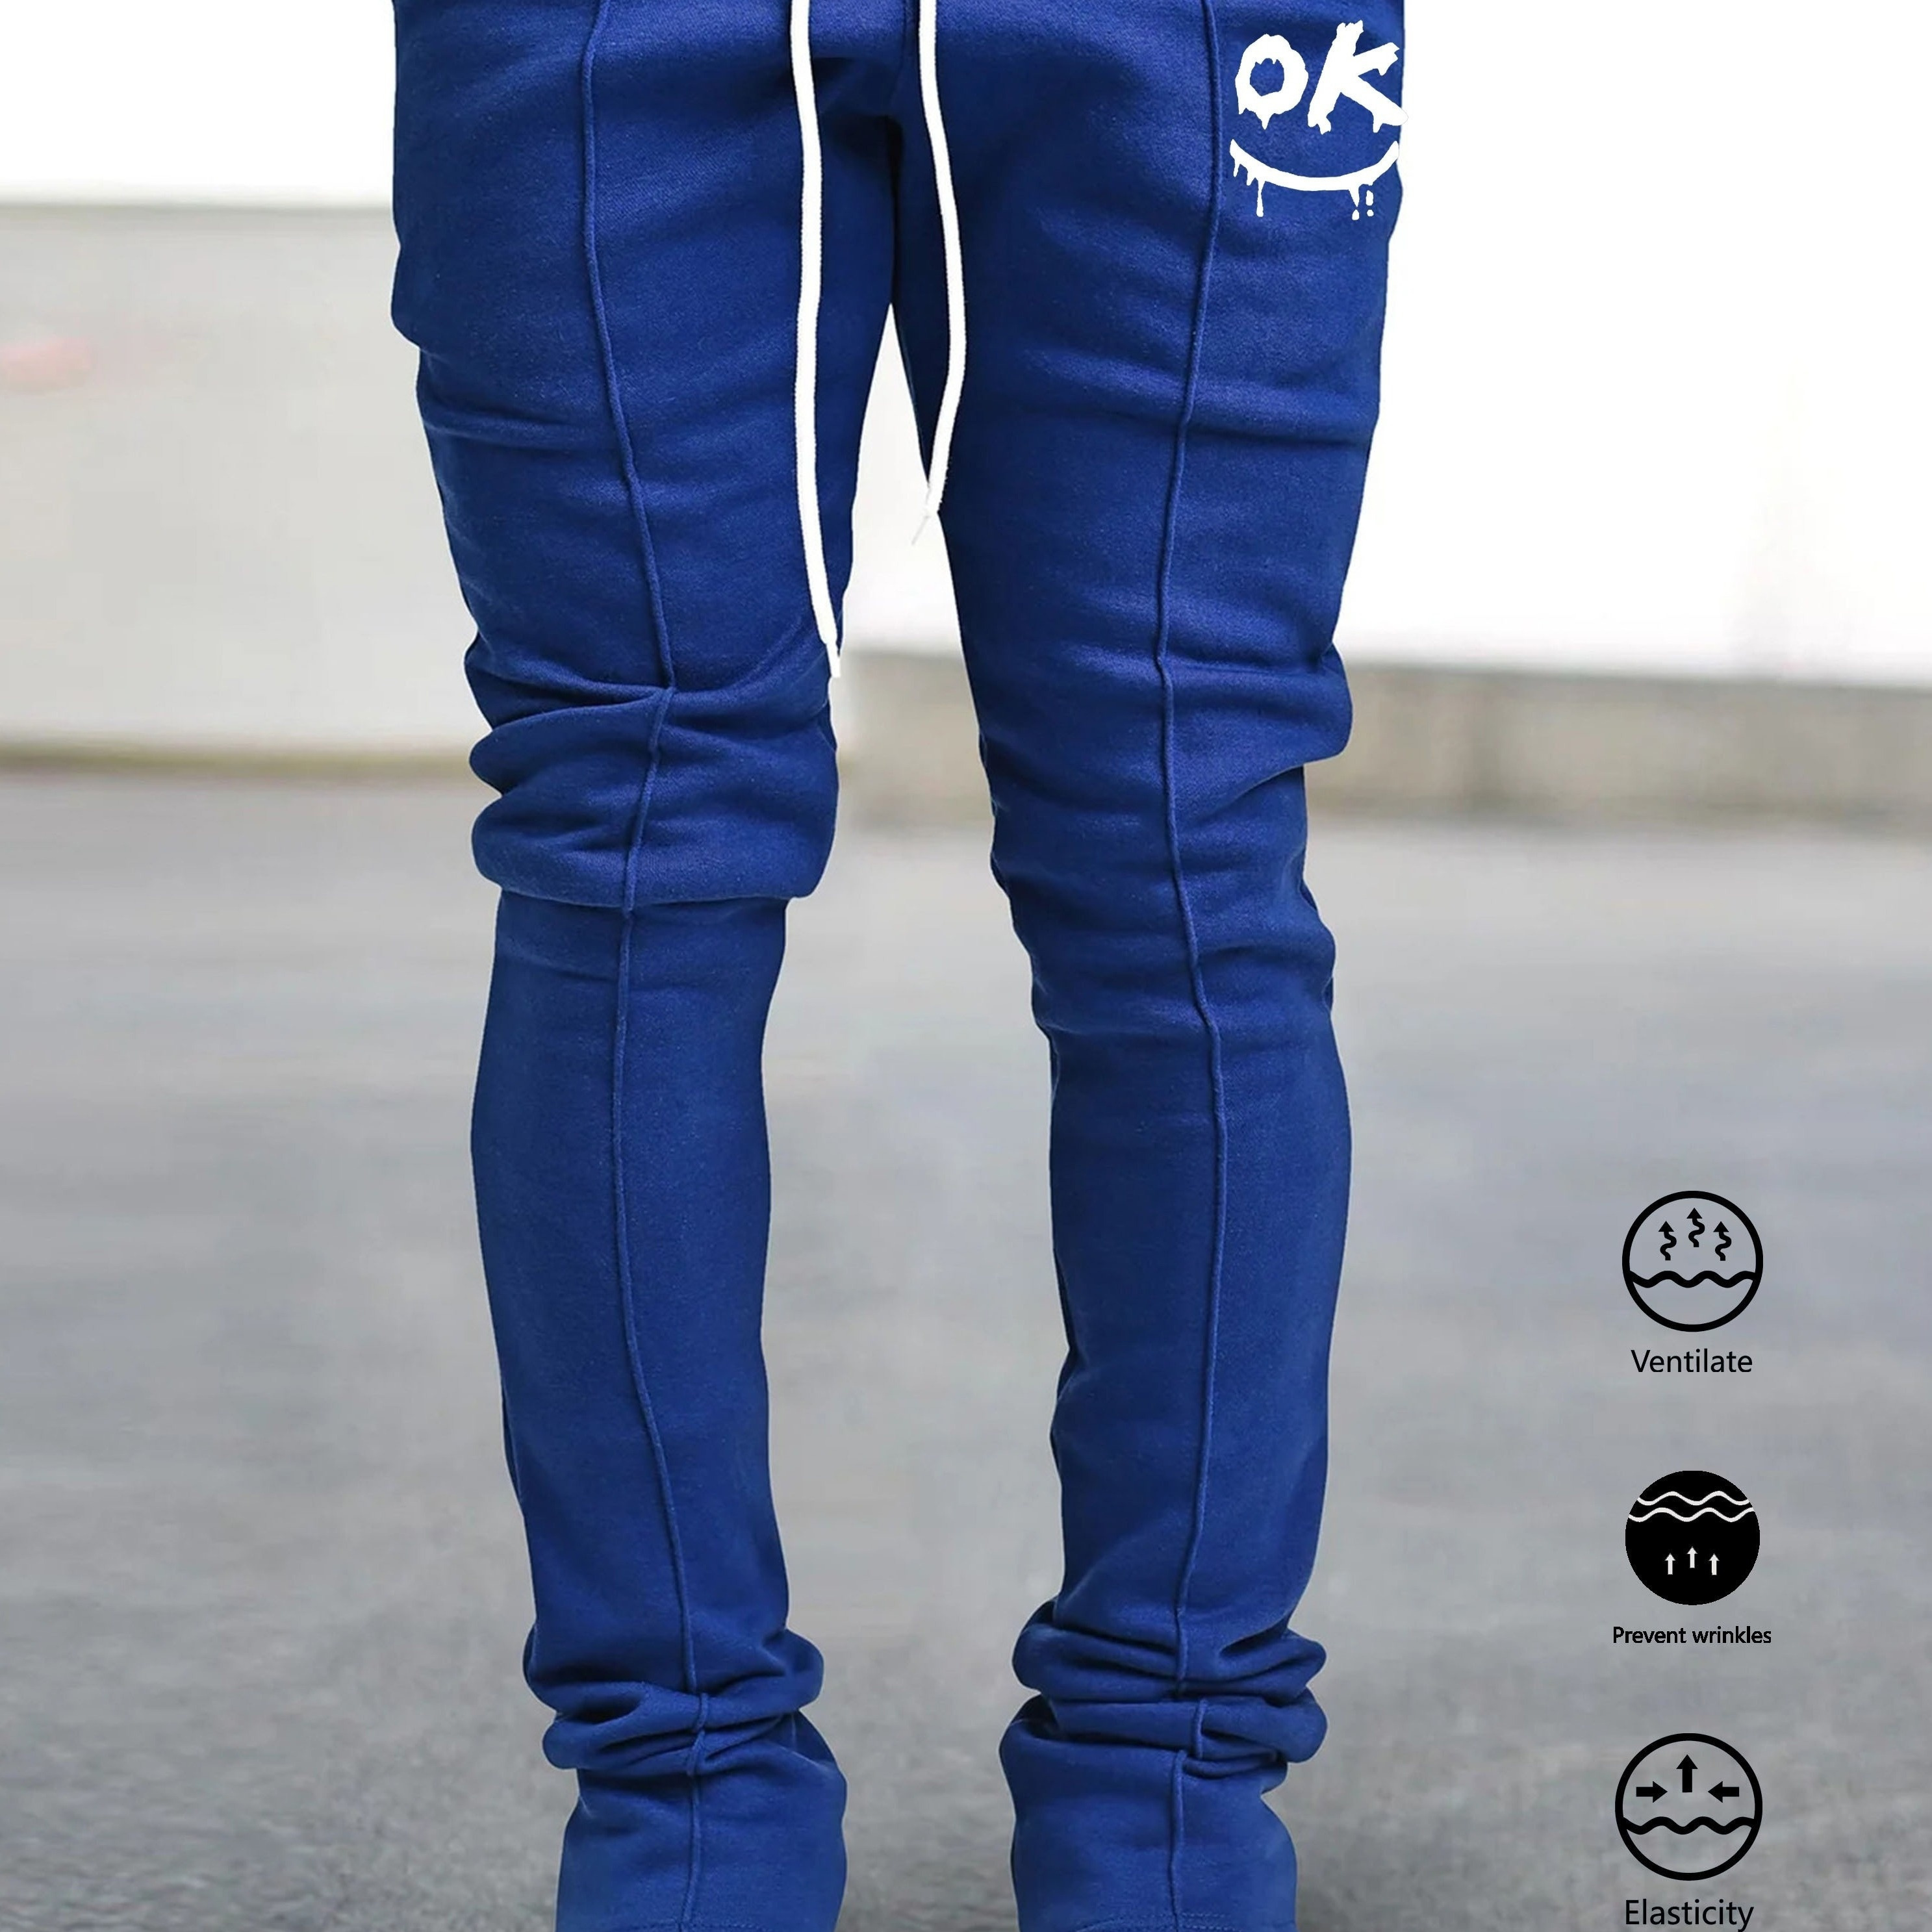 

"ok" Print Flared Trousers, Men's Casual Stretch Hip Hop Style Joggers For Performance Leisure Activities